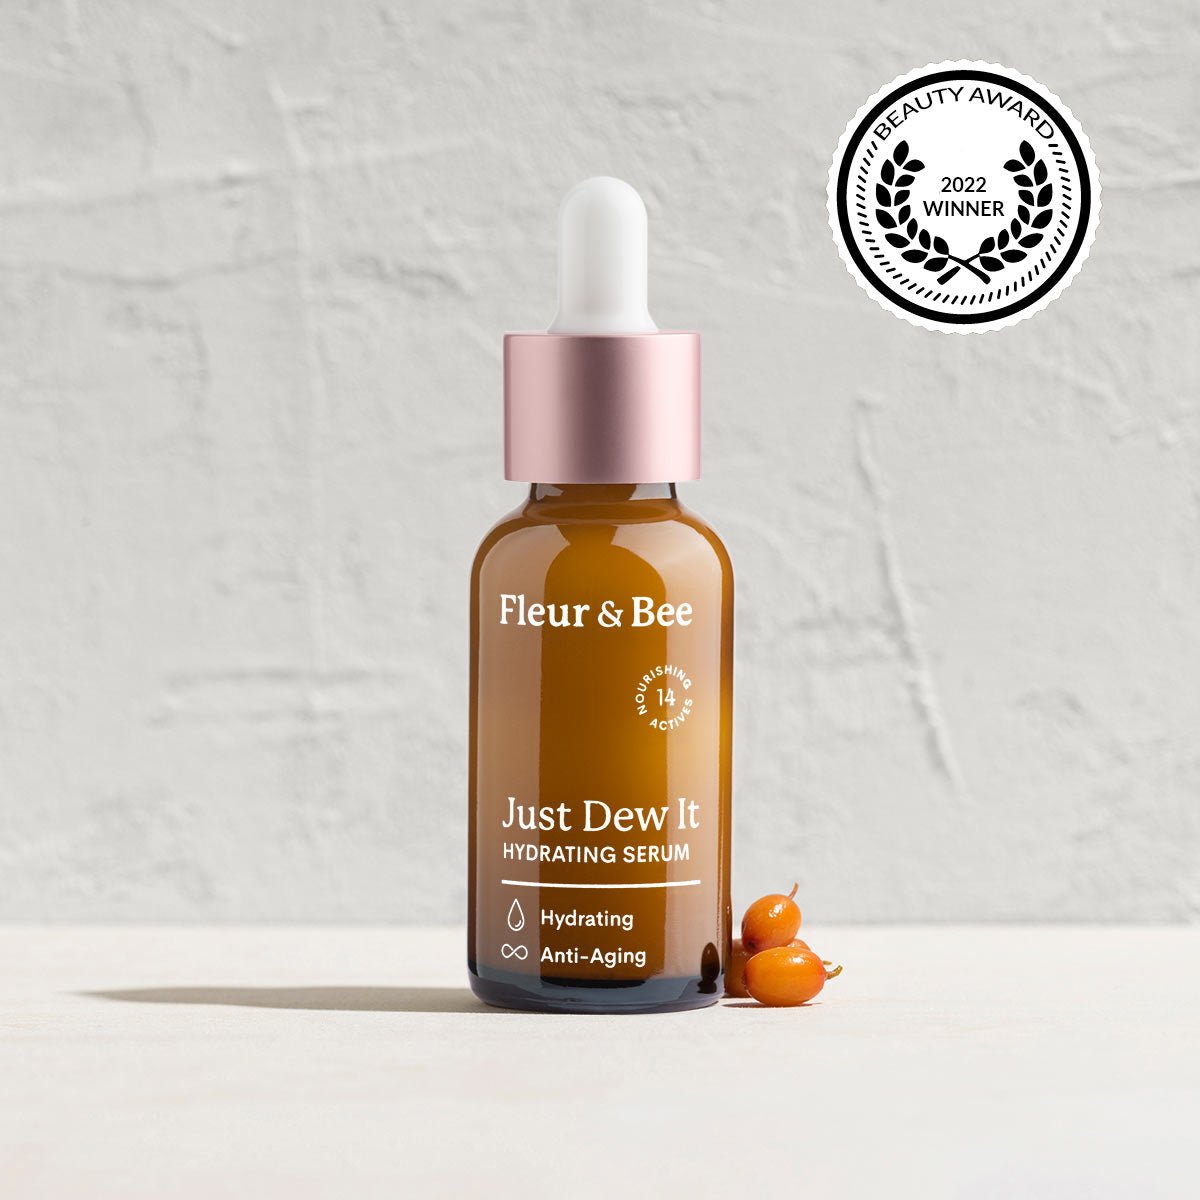 Just Dew It, a natural Hydrating Serum by Fleur & Bee